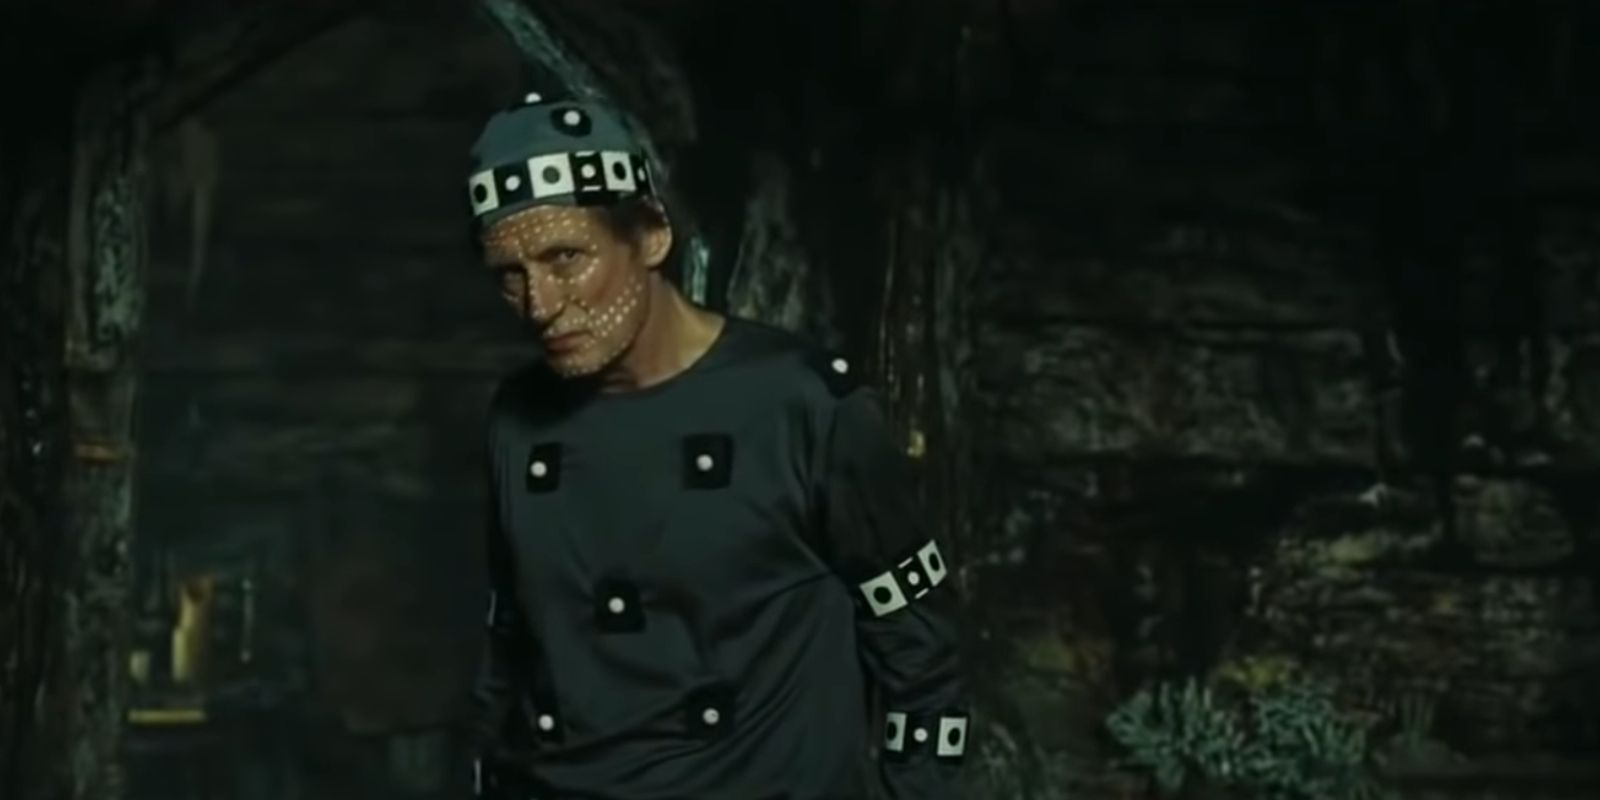 Bill Nighy in a motion-capture suit for Pirates Of The Caribbean At World's End